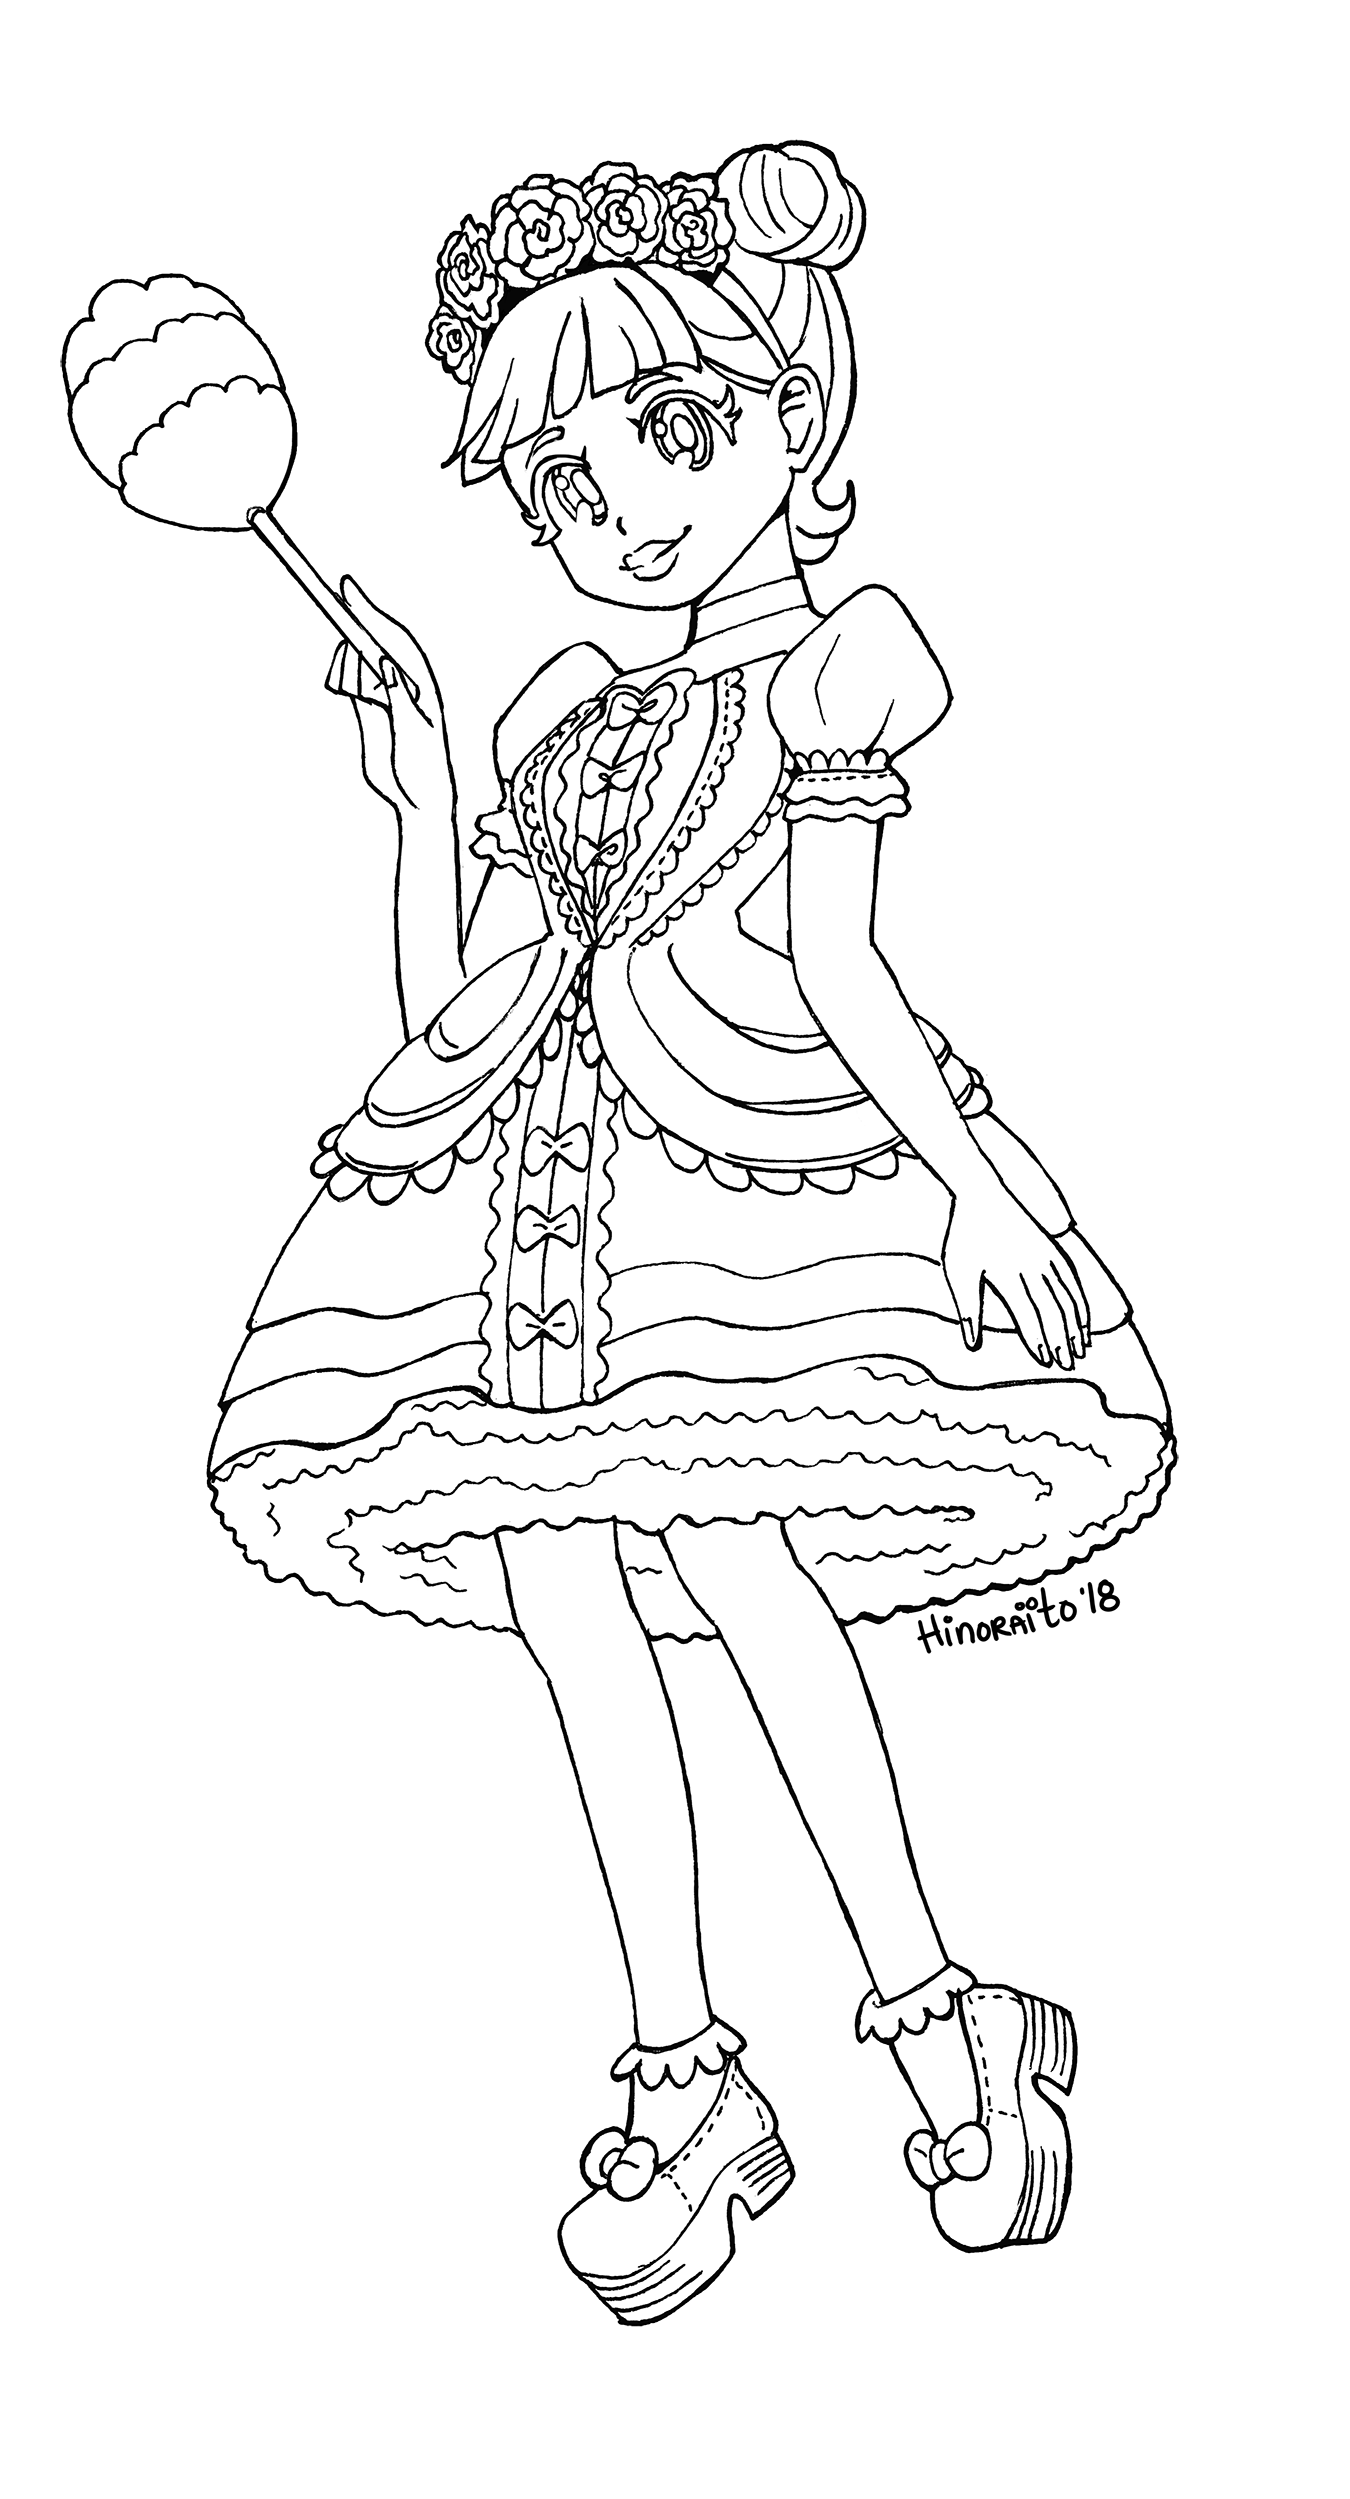 Midnight - LOL Surprise Doll - Coloring Page by hinoraito on DeviantArt